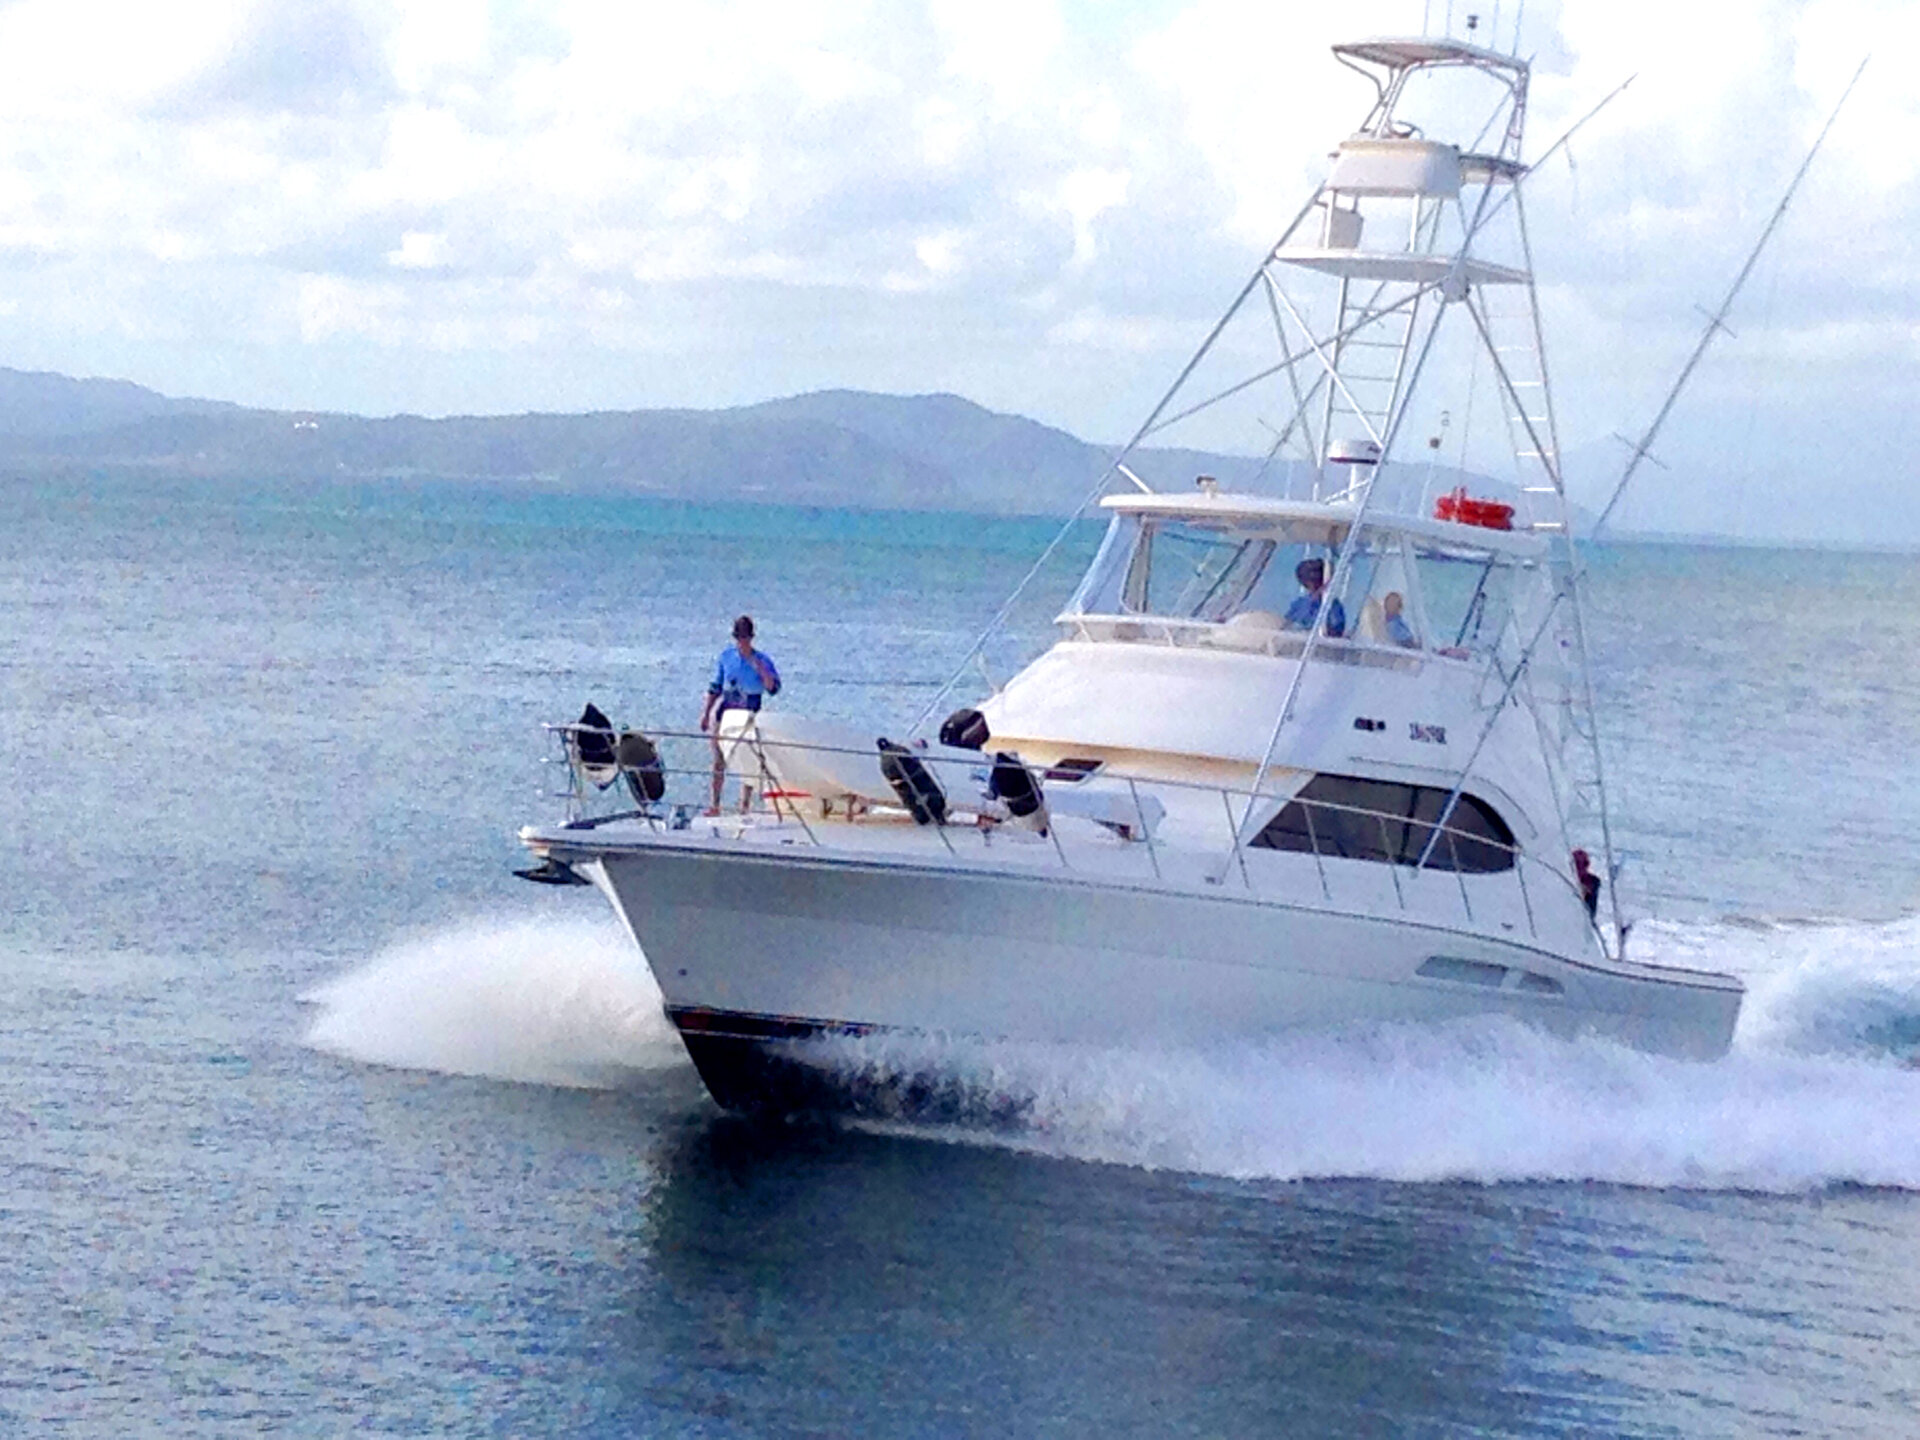 Allure fishing vessel heading out to the Great Barrier Reef